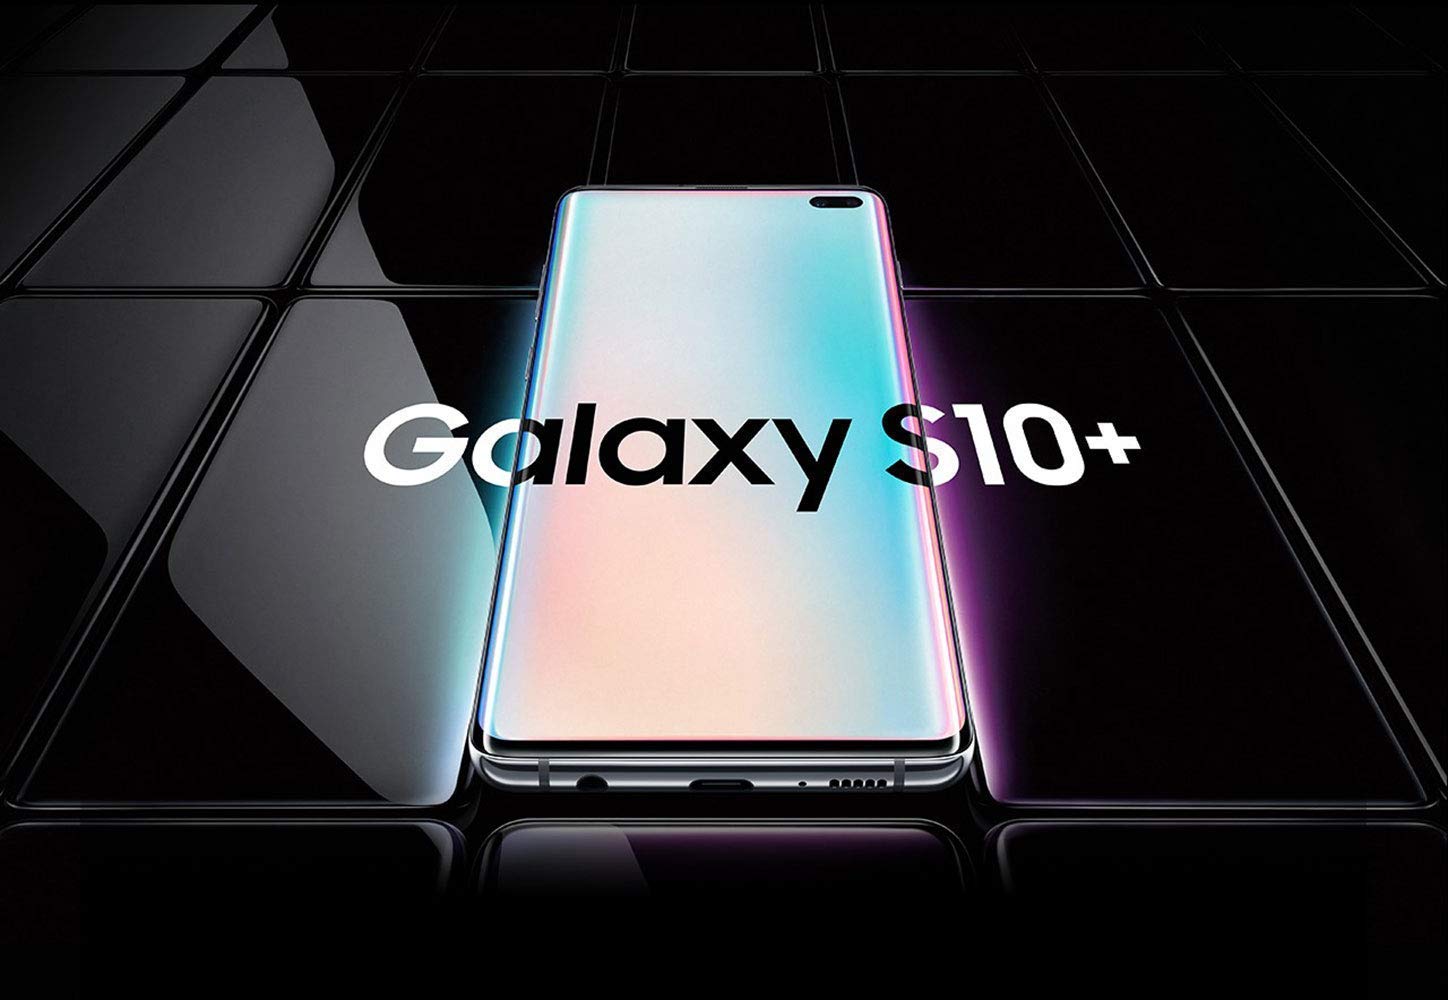 Samsung Galaxy S10 Plus SM-G9750 512GB, Mobile phone Reviews and Comments